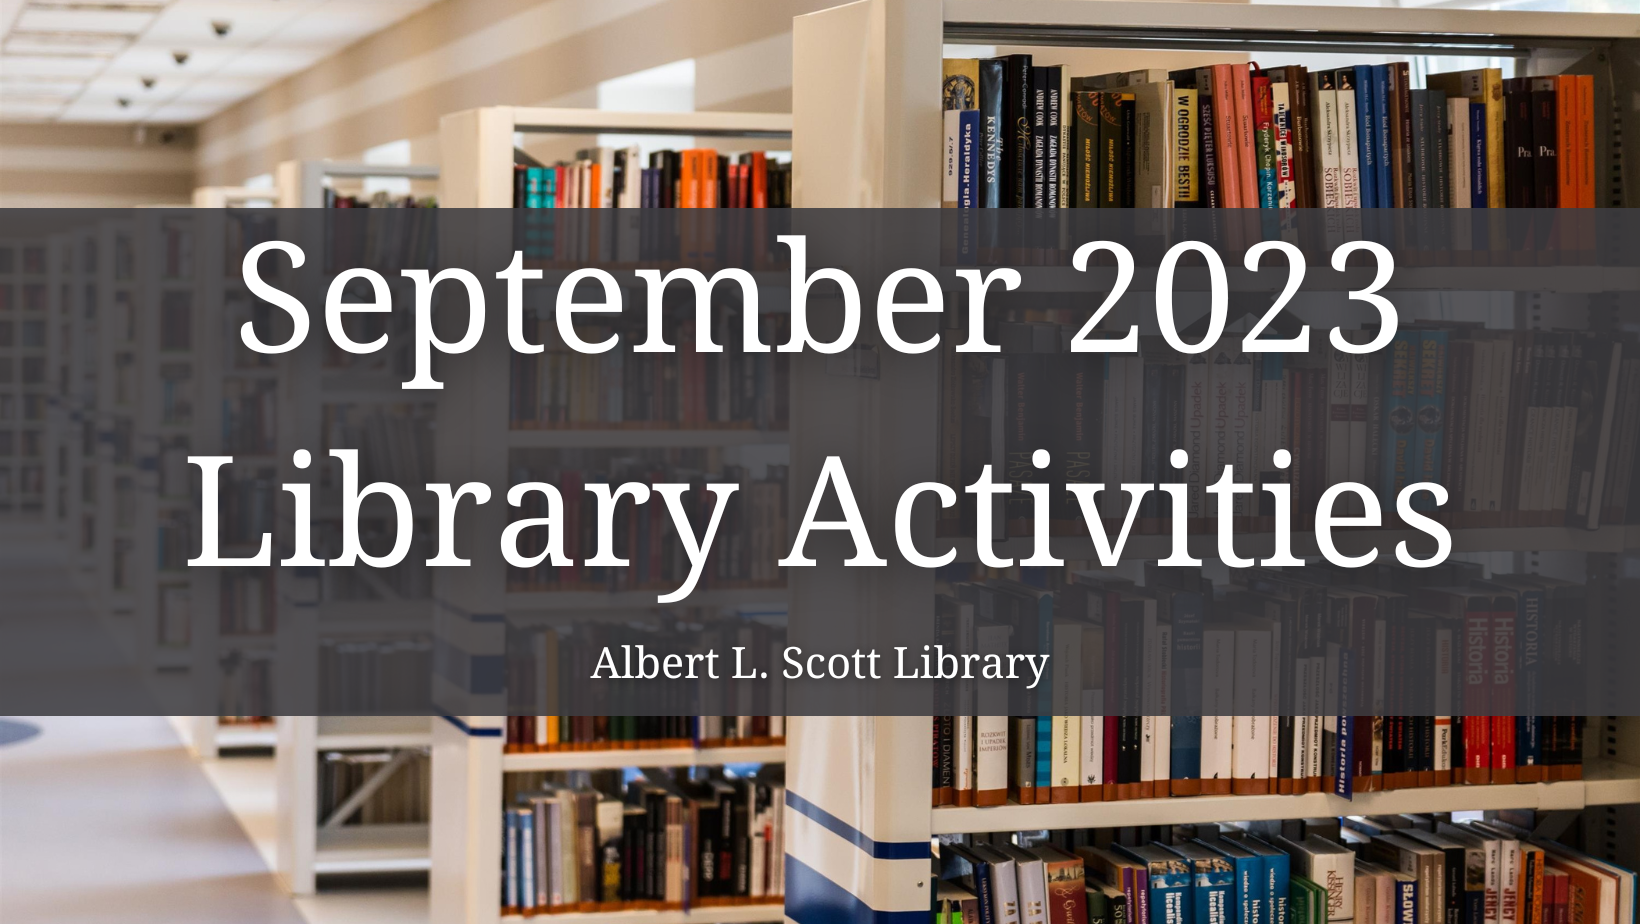 September Events at the Albert L. Scott Library